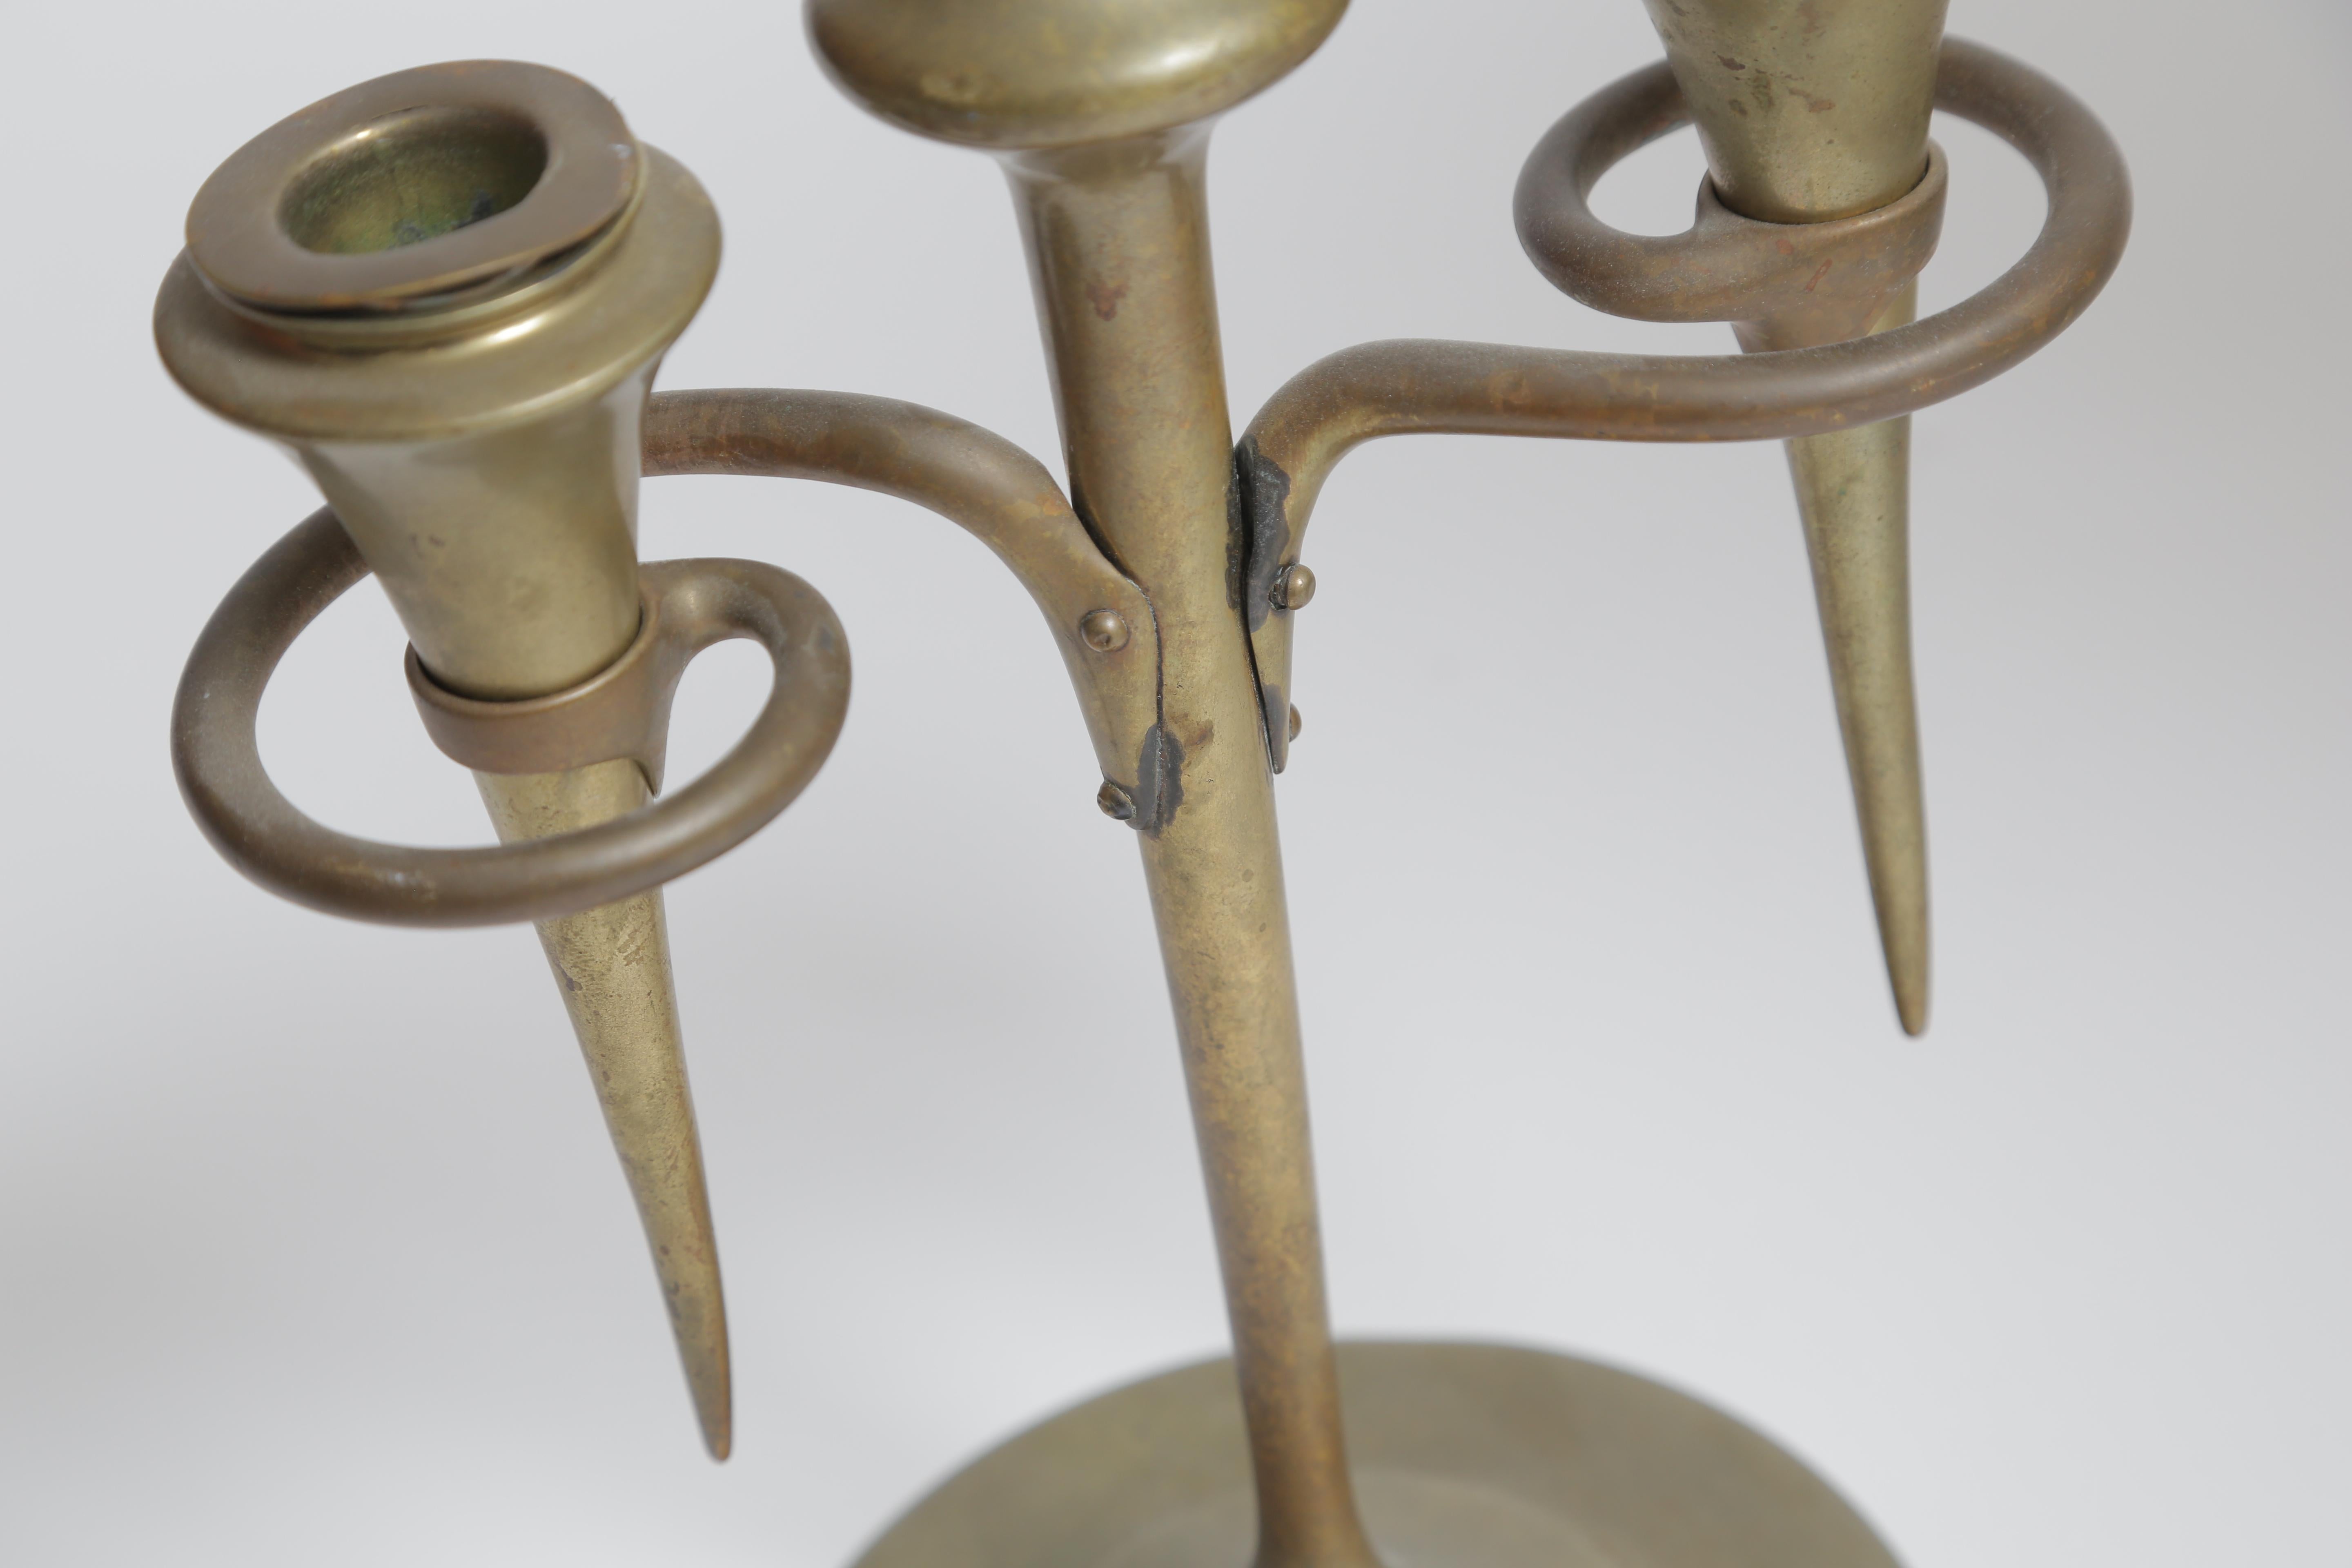 A solid brass candlestick with original bobeches.
Original patinated surface. Signed
An extremely forward l-looking design from the early 1900s.